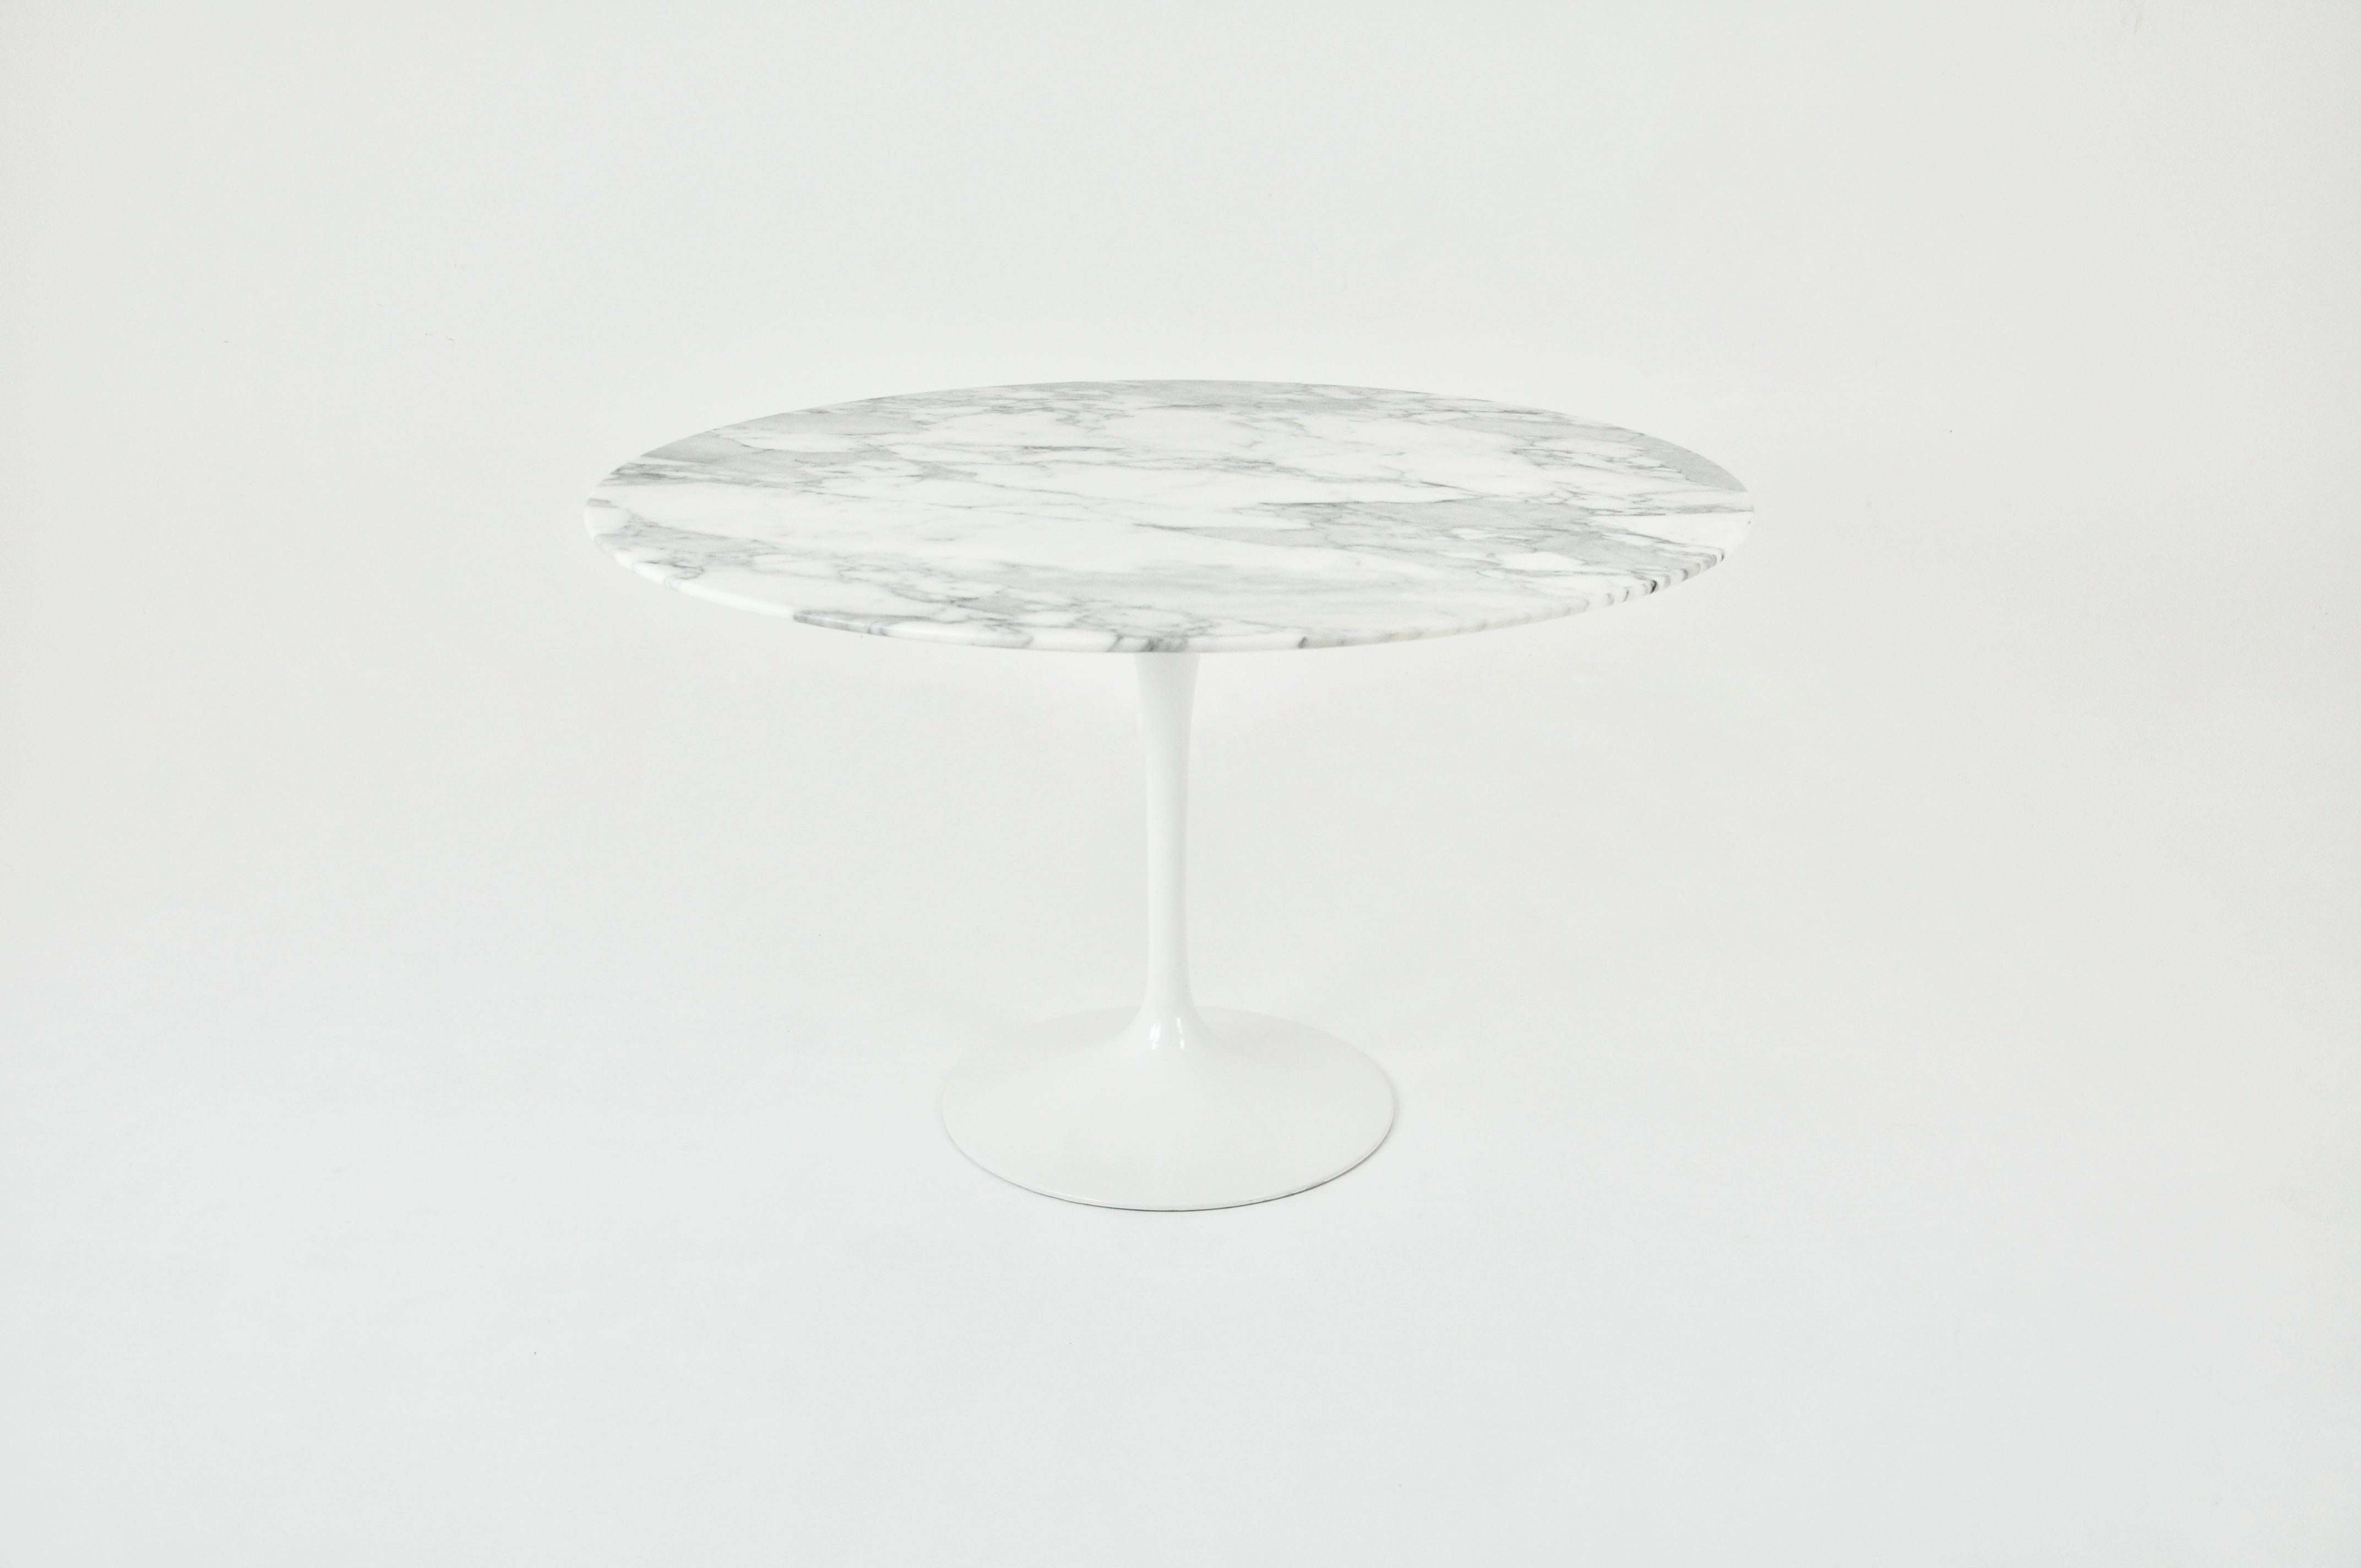 Round table with marble top and aluminium base designed by Eero Saarinen and produced by Knoll International. Wear due to time and age of the table.